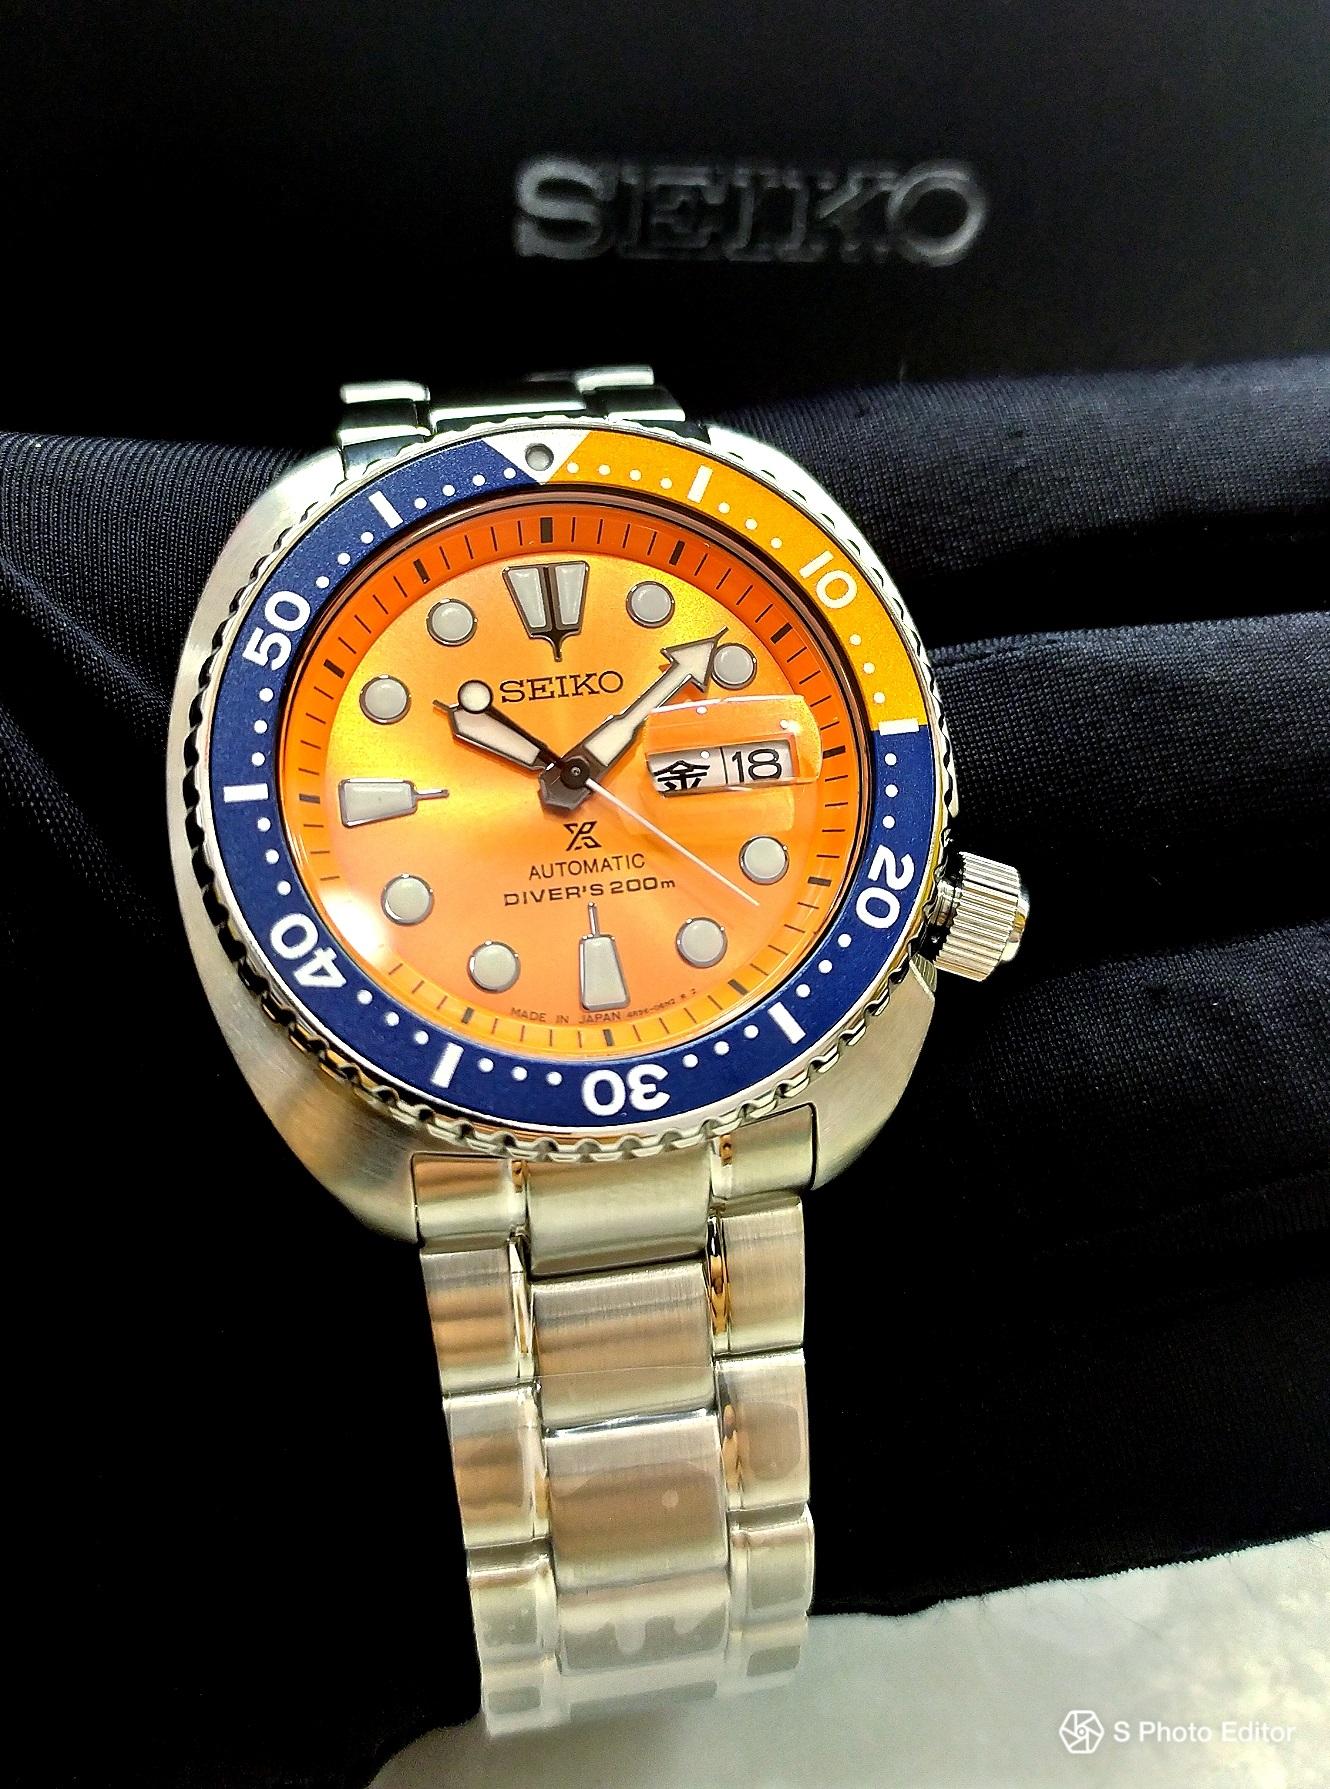 JDM * LIMITED EDITION BRAND NEW SEIKO PROSPEX ORANGE TURTLE NEMO MADE IN  JAPAN VERSION WITH KANJI DAY WHEEL MENS AUTOMATIC DIVERS WATCH SBDY023 |  Lazada Singapore